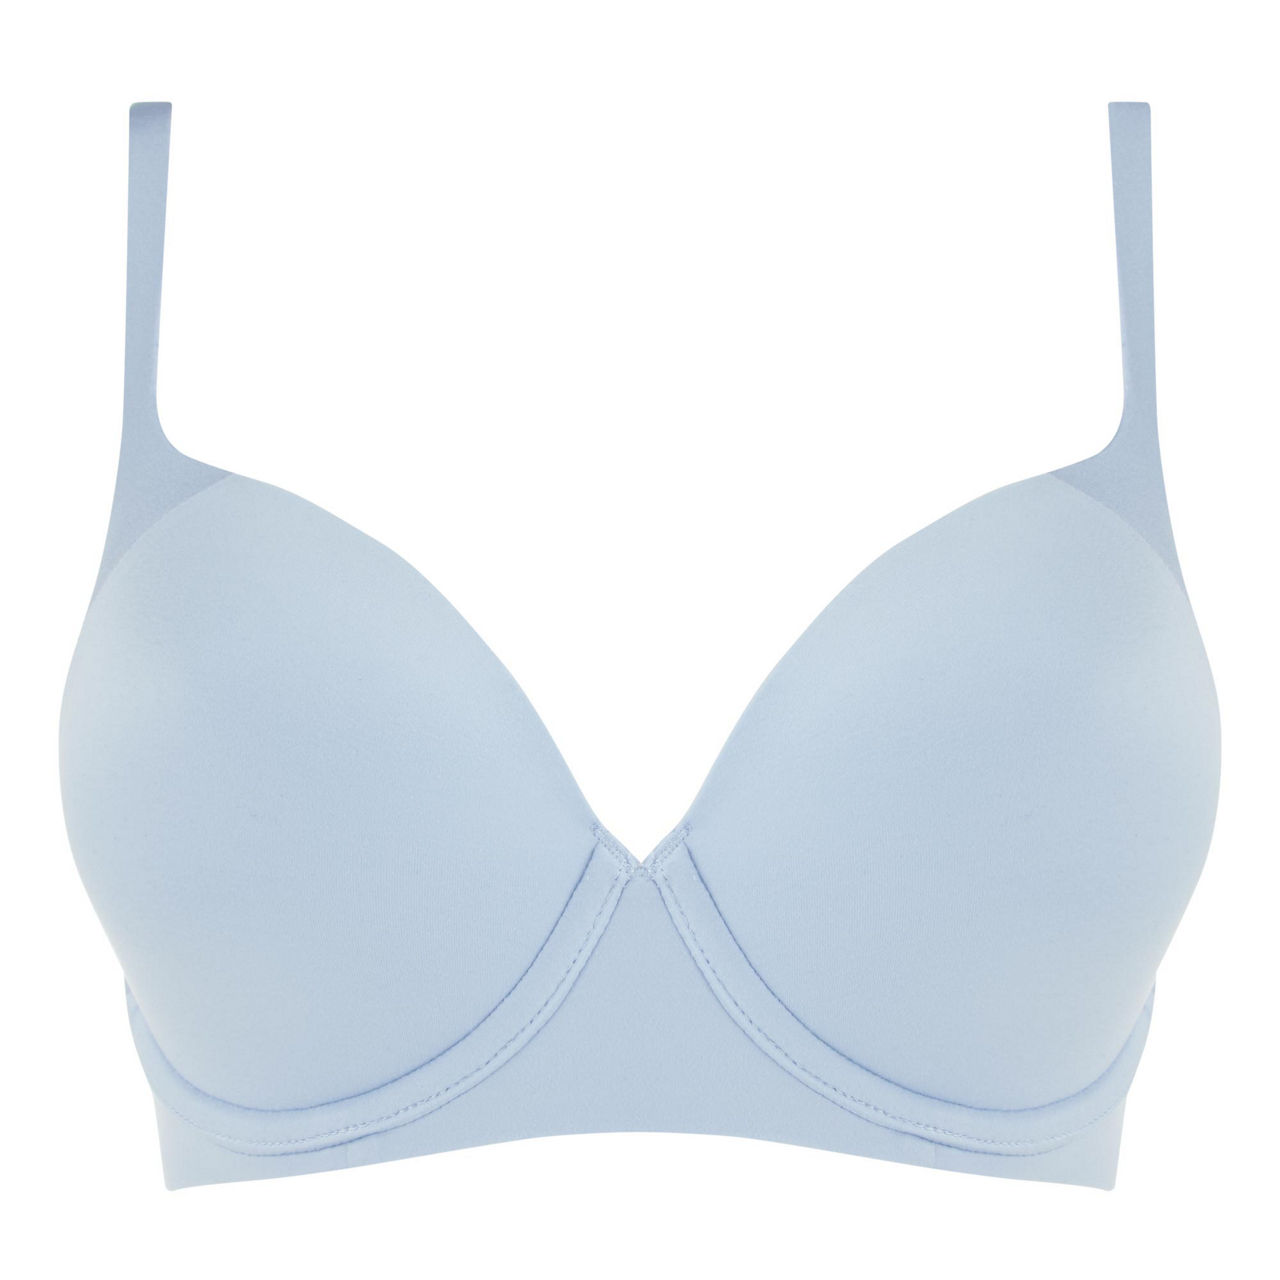 Everyday Soft Touch Wellbeing Wired Padded Bra in Chrome